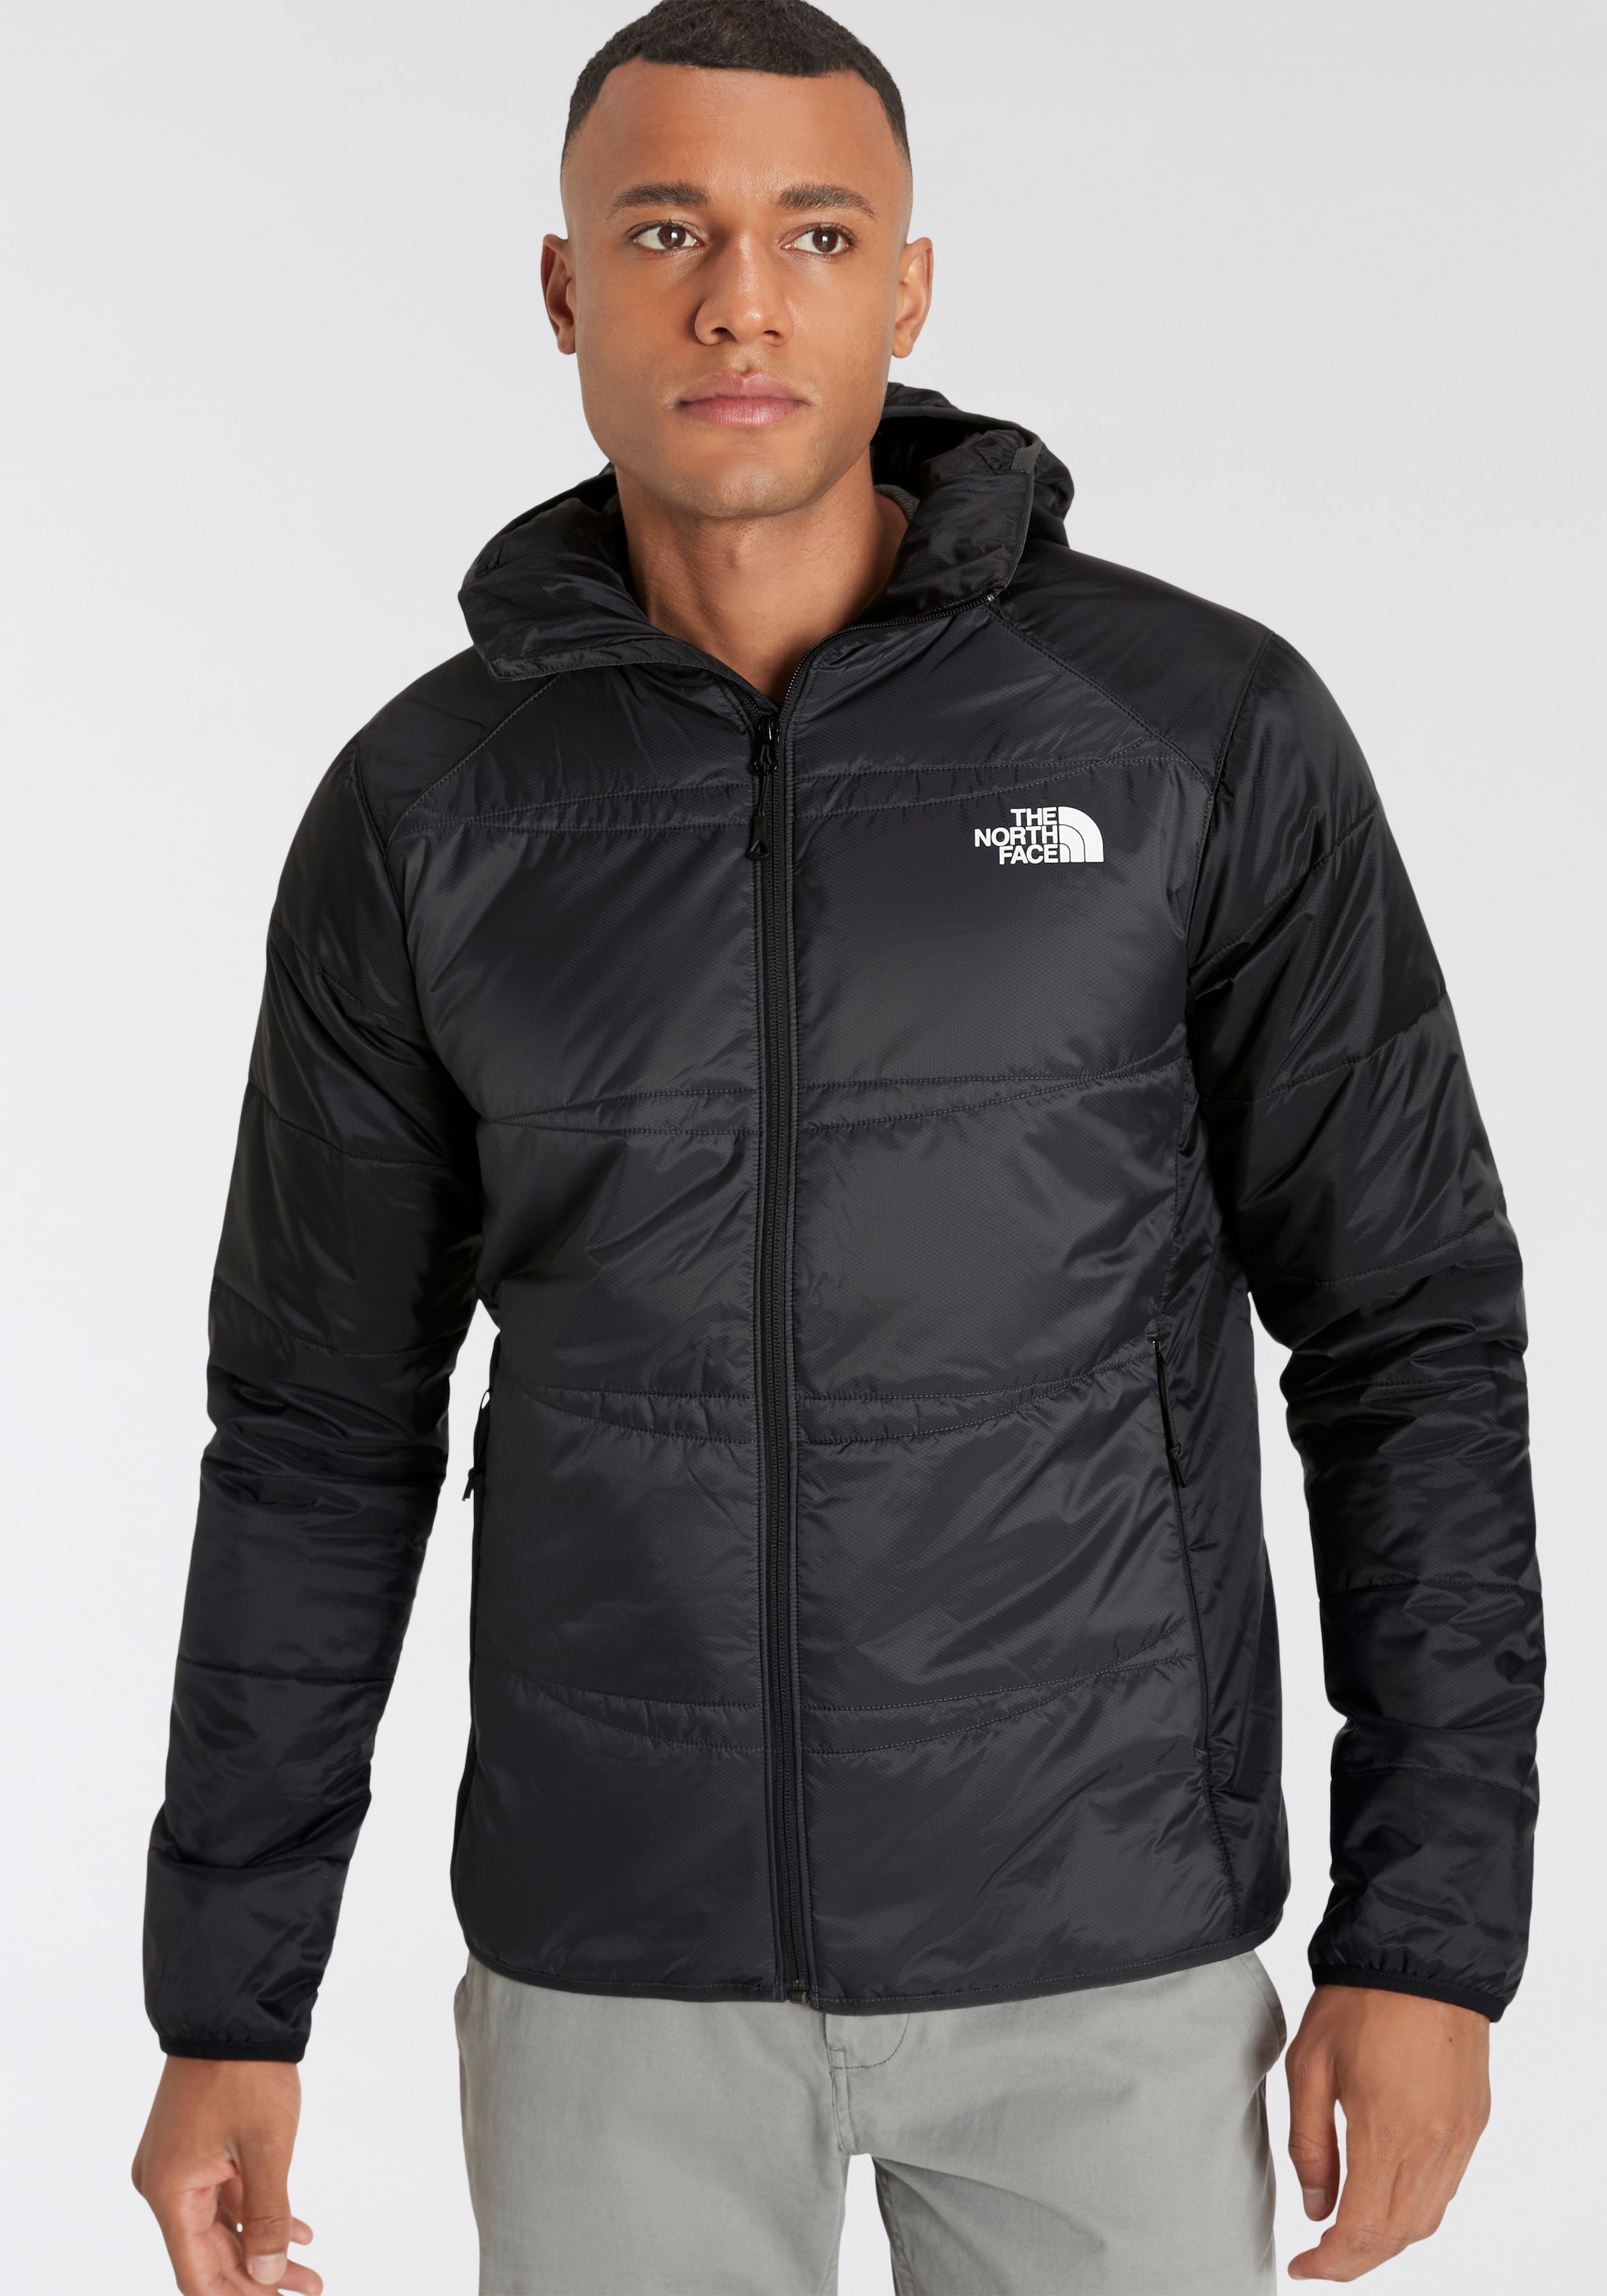 Funktionsjacke QUEST »M JACKET«, North Face mit SYNTHETIC The Logodruck bei